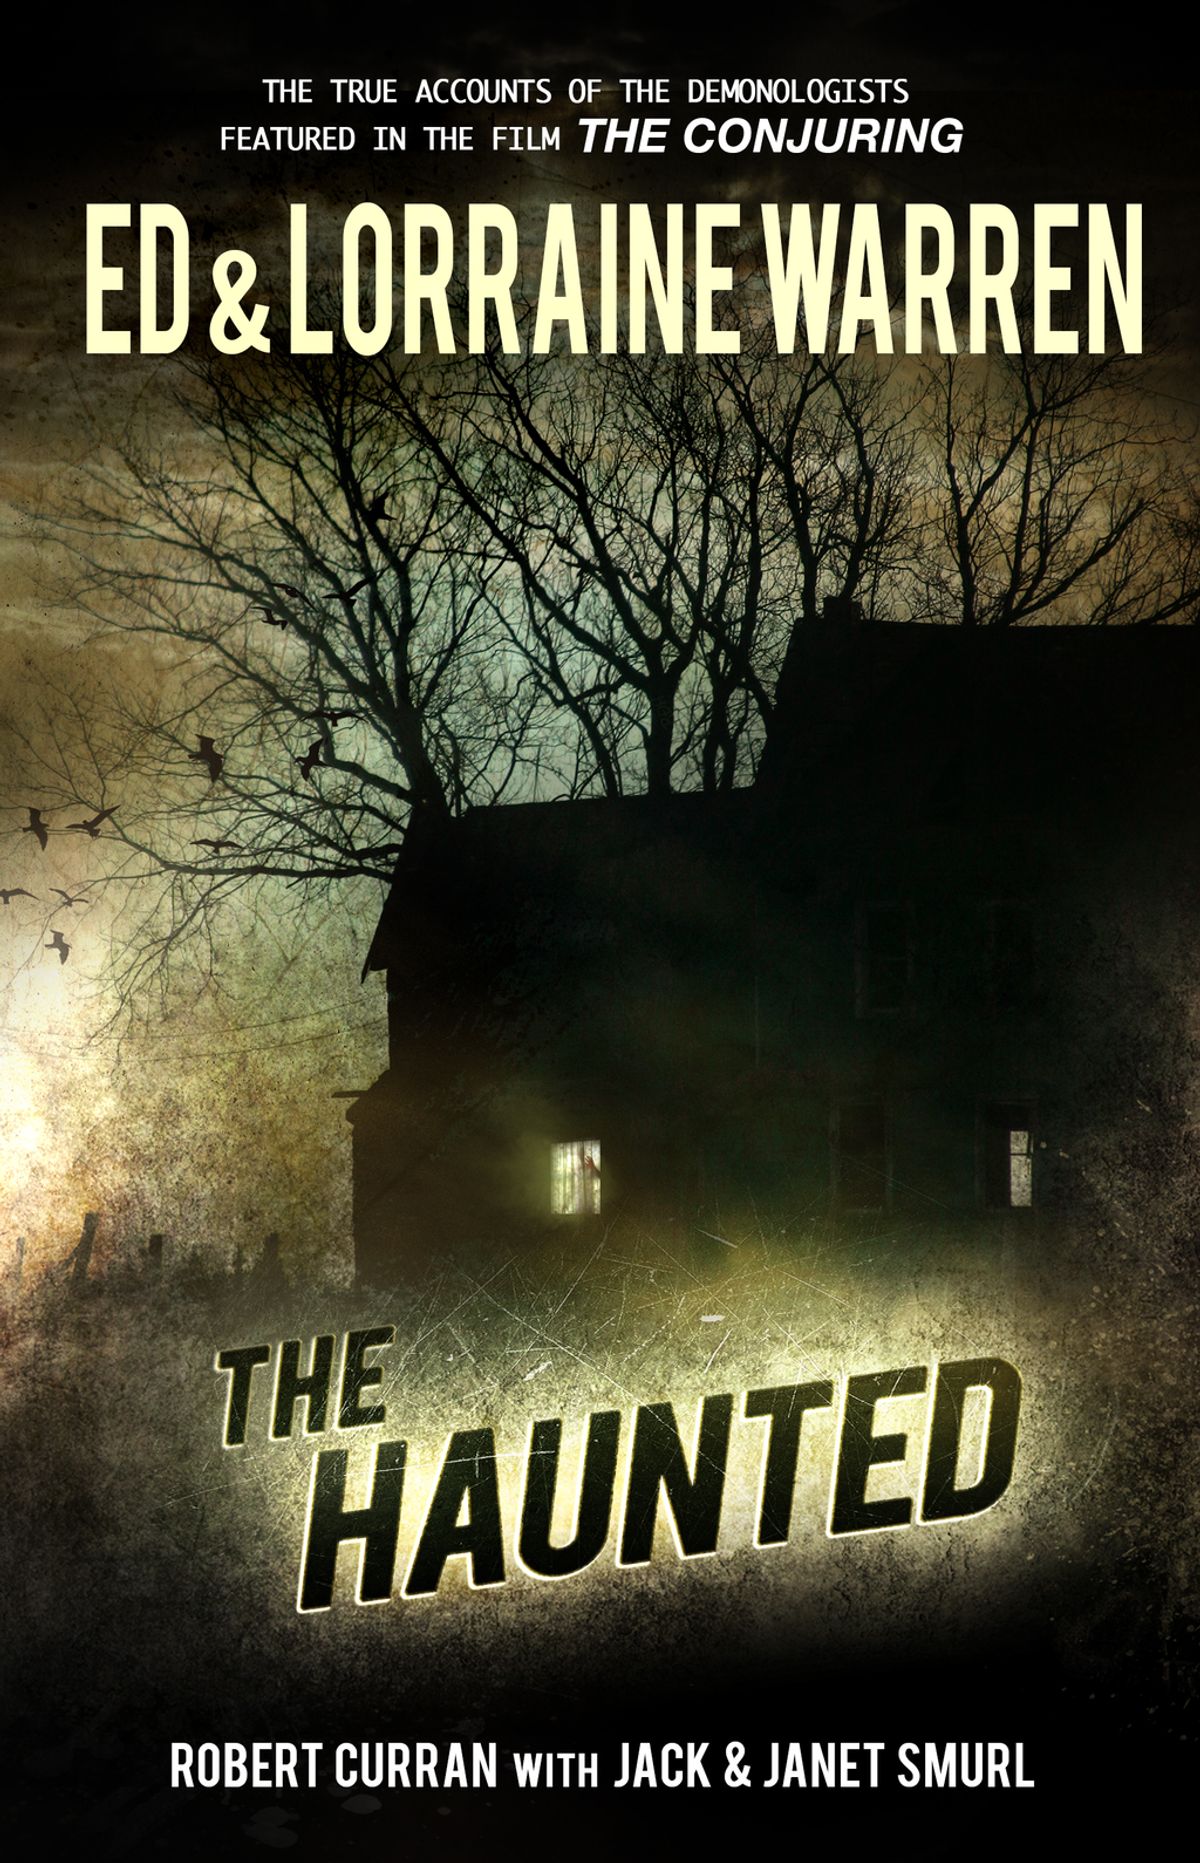 ‘The Haunted’ by Robert Curran